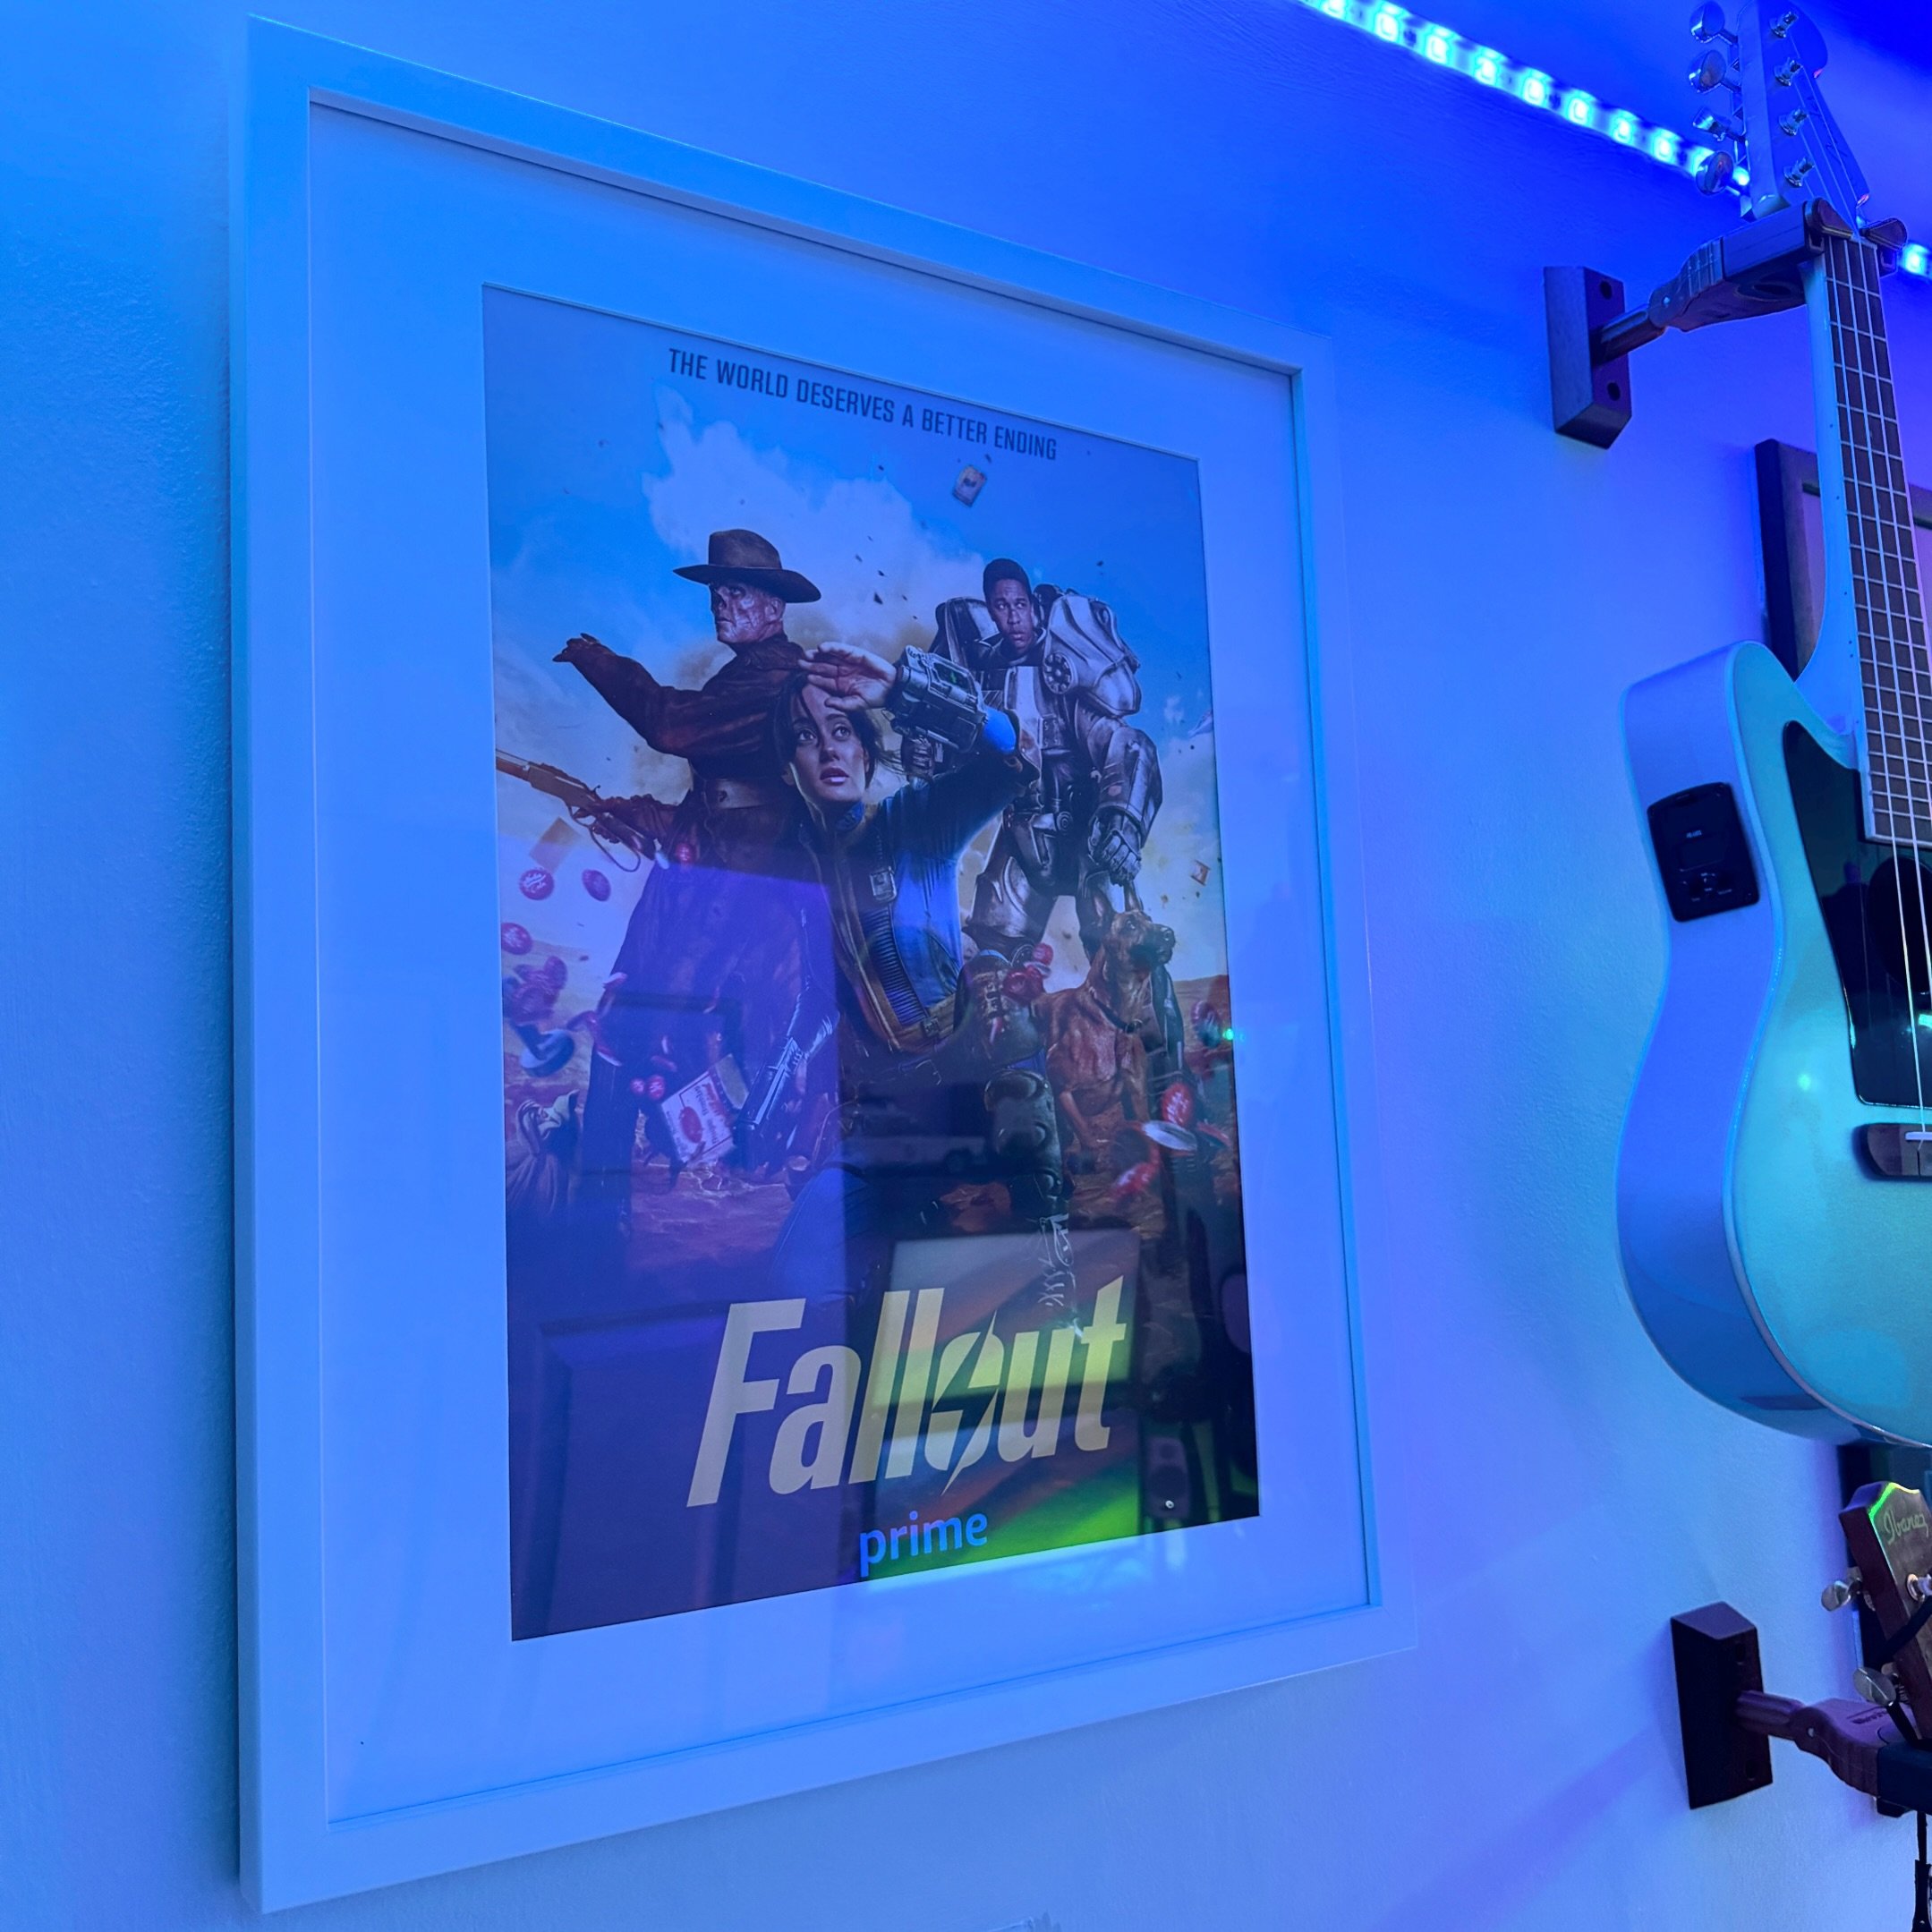 Fallout TV Show poster framed and up on the wall&hellip;

#fallout #fallout76 #fallout4 #falloutcommunity #games #gaming #music #studio #art #poster